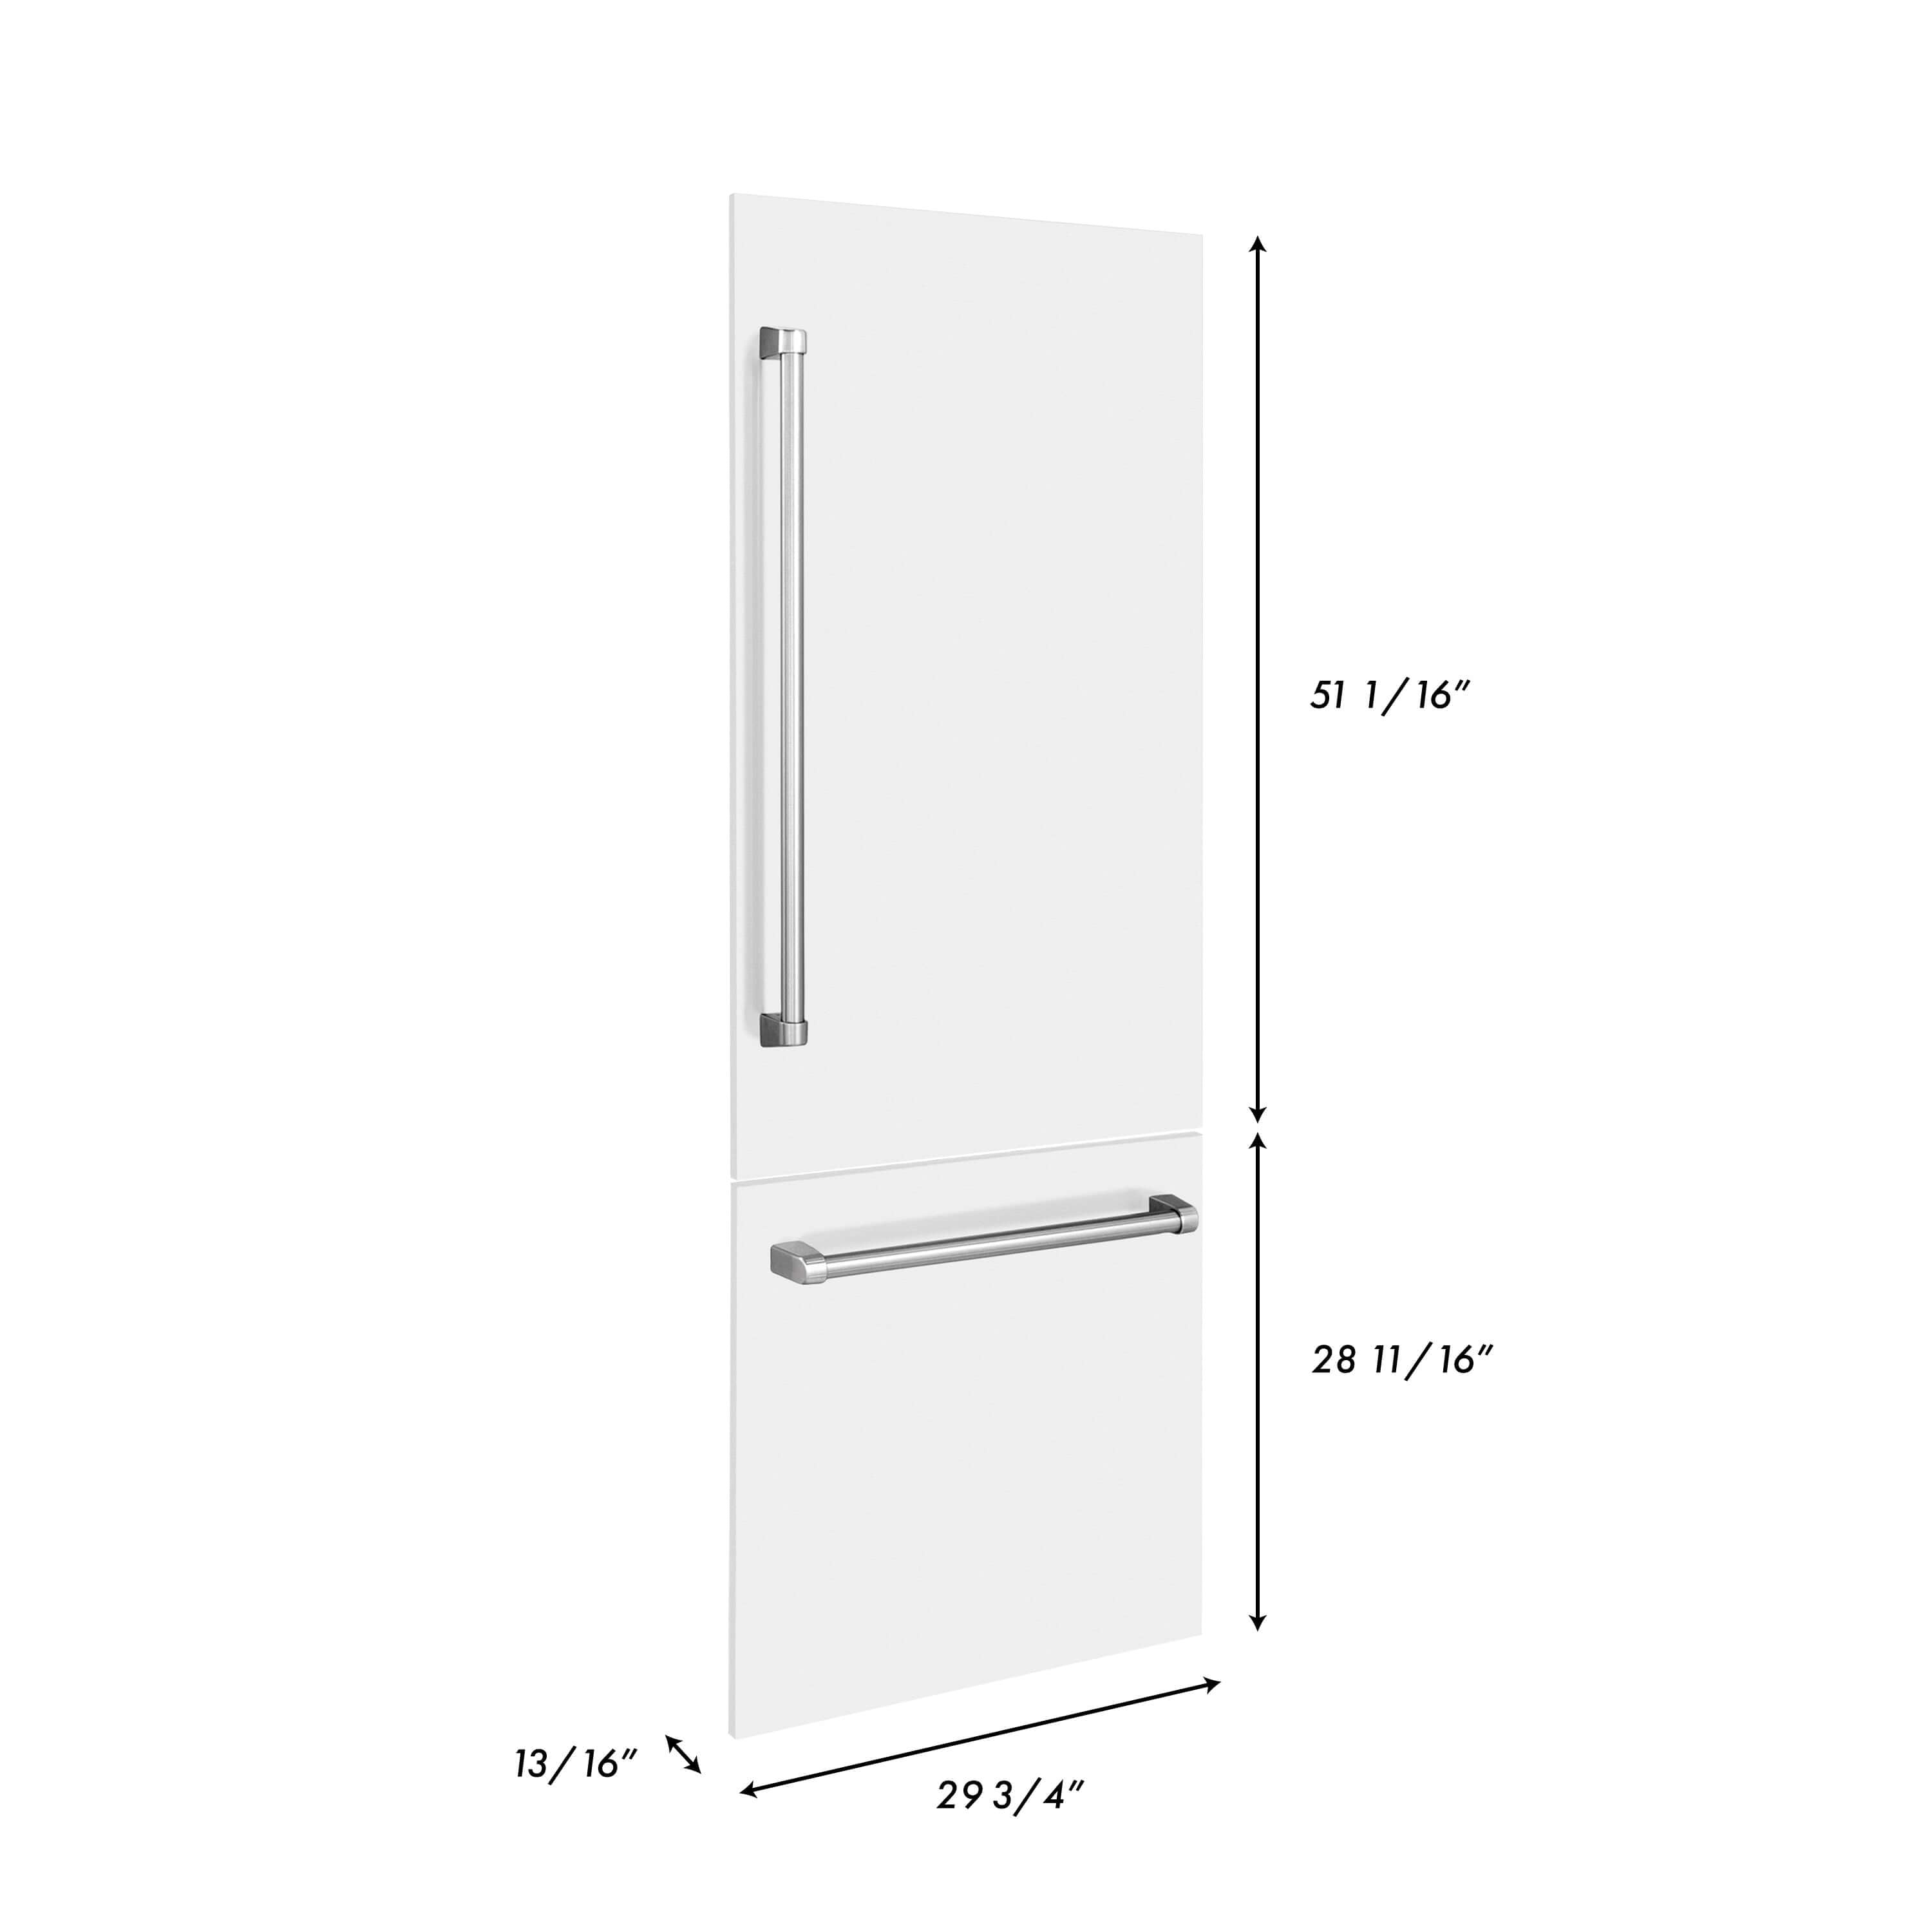 Panels & Handles Only- ZLINE 30 in. Refrigerator Panels in White Matte for a 30 in. Built-in Refrigerator (RPBIV-WM-30) dimensional diagram with measurements.